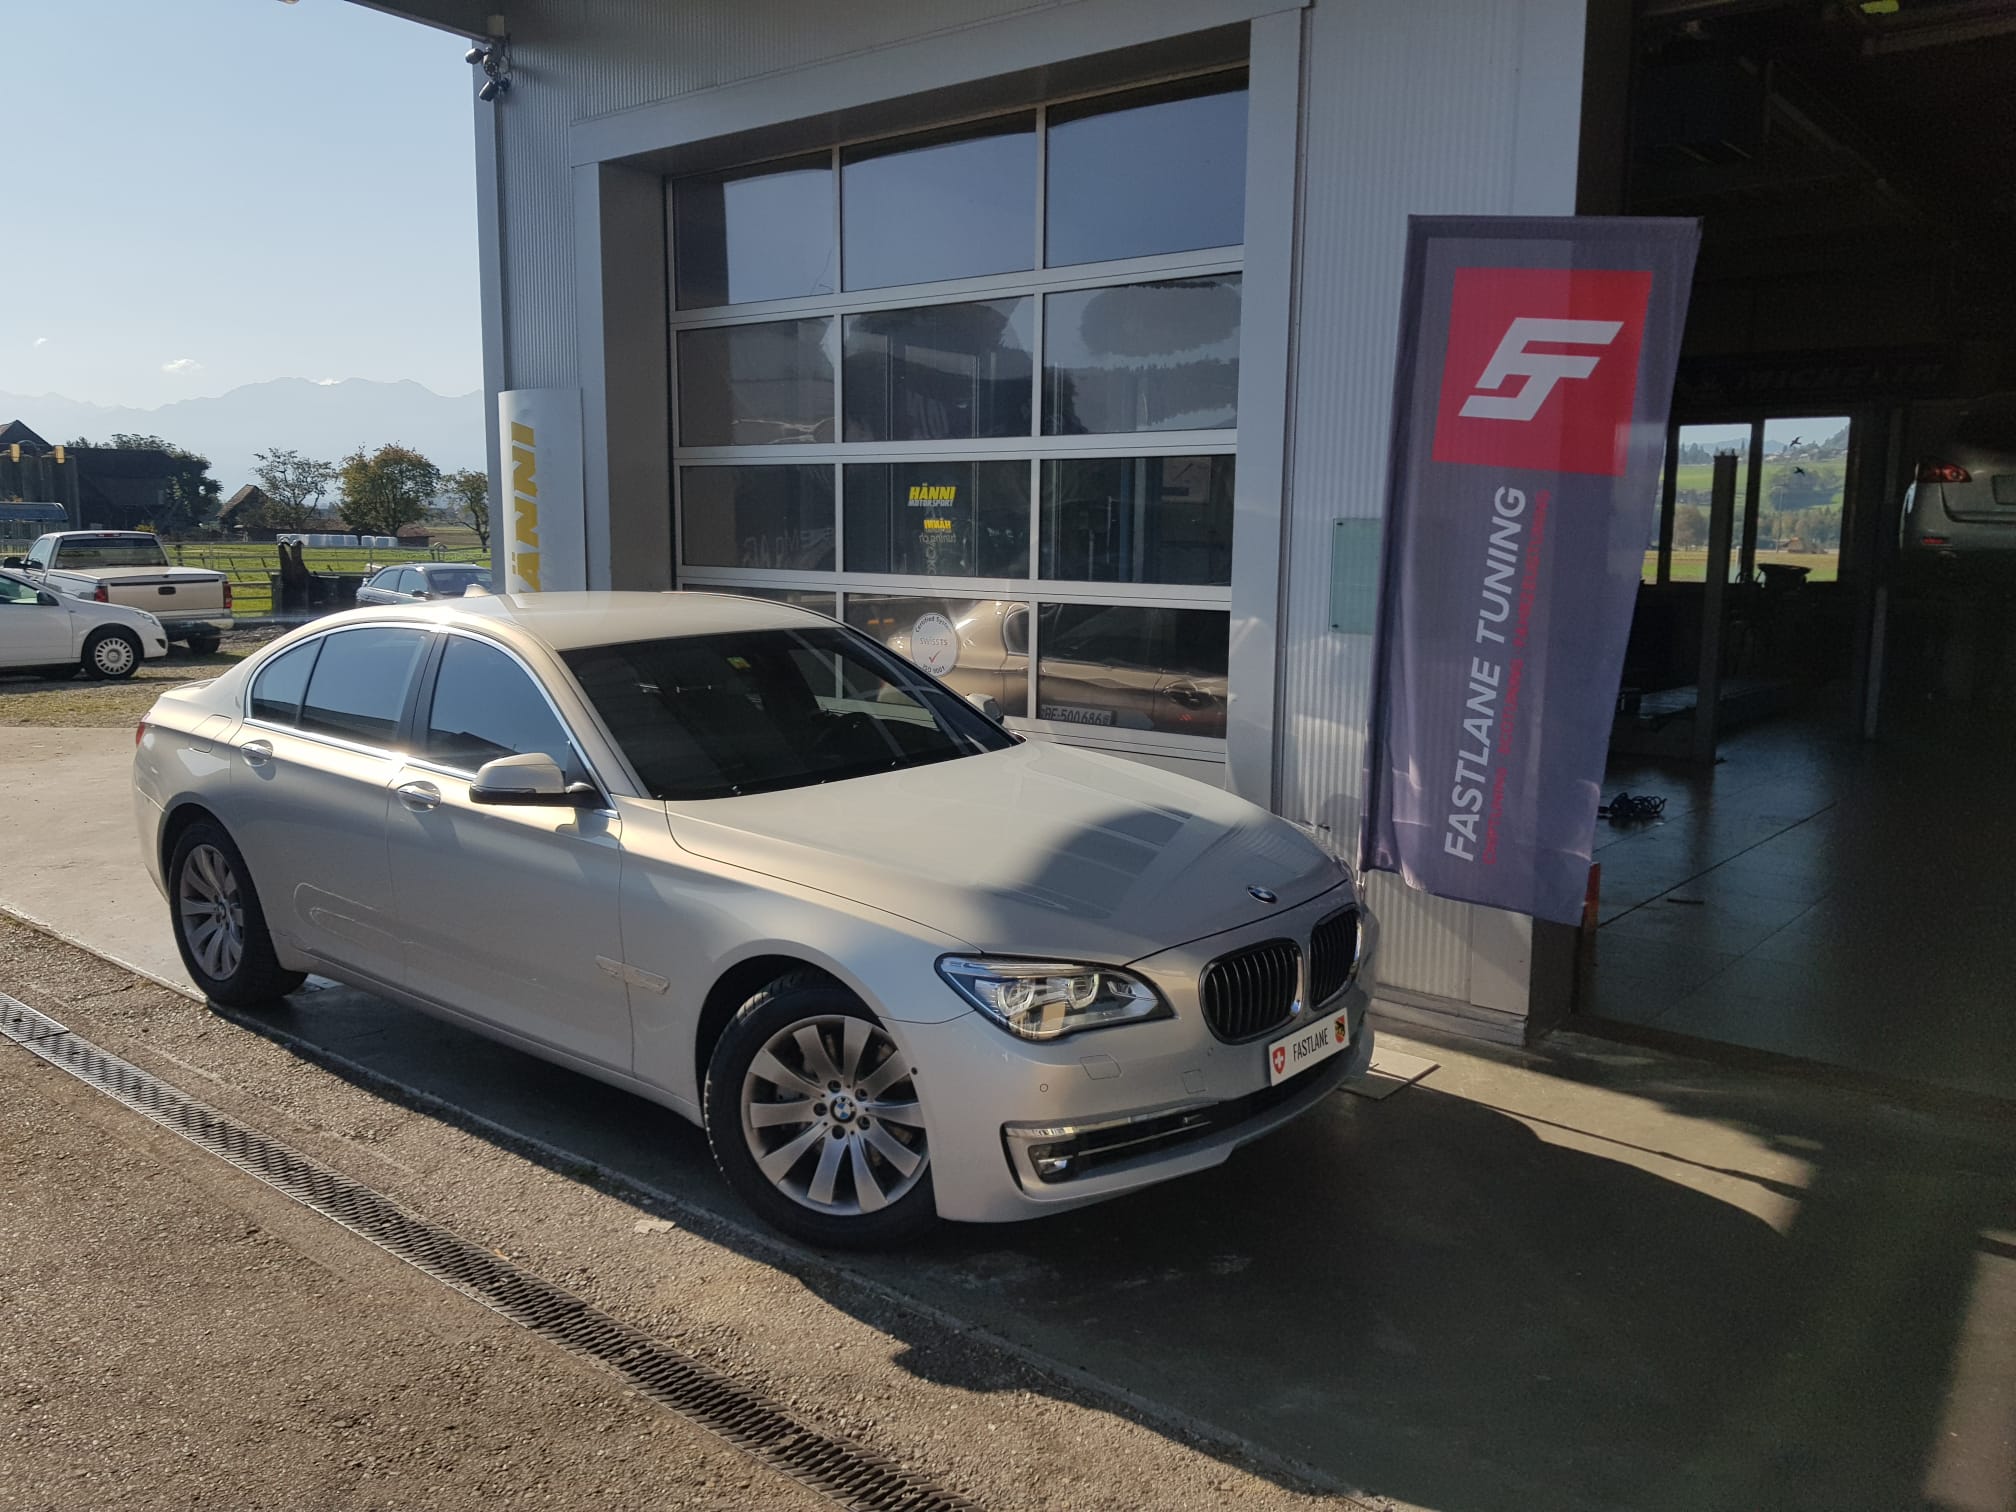 A silver grey BMW 740d xDrive stands next to the fastlane tuning schweiz flag